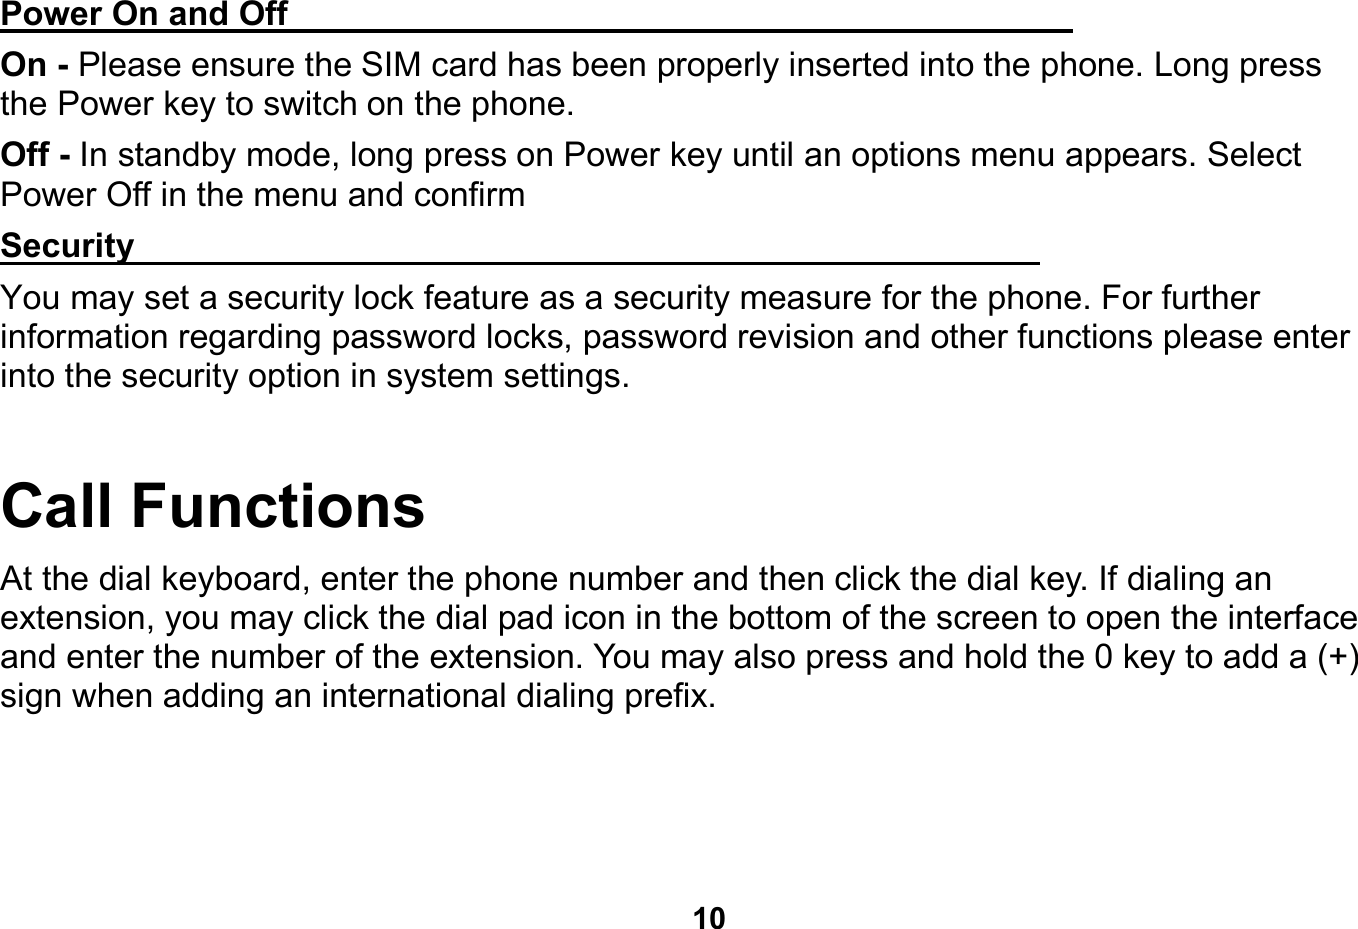   10  Power On and Off                                                                            On - Please ensure the SIM card has been properly inserted into the phone. Long press the Power key to switch on the phone. Off - In standby mode, long press on Power key until an options menu appears. Select Power Off in the menu and confirm Security                                                      You may set a security lock feature as a security measure for the phone. For further information regarding password locks, password revision and other functions please enter into the security option in system settings. Call Functions                                      At the dial keyboard, enter the phone number and then click the dial key. If dialing an extension, you may click the dial pad icon in the bottom of the screen to open the interface and enter the number of the extension. You may also press and hold the 0 key to add a (+) sign when adding an international dialing prefix. 